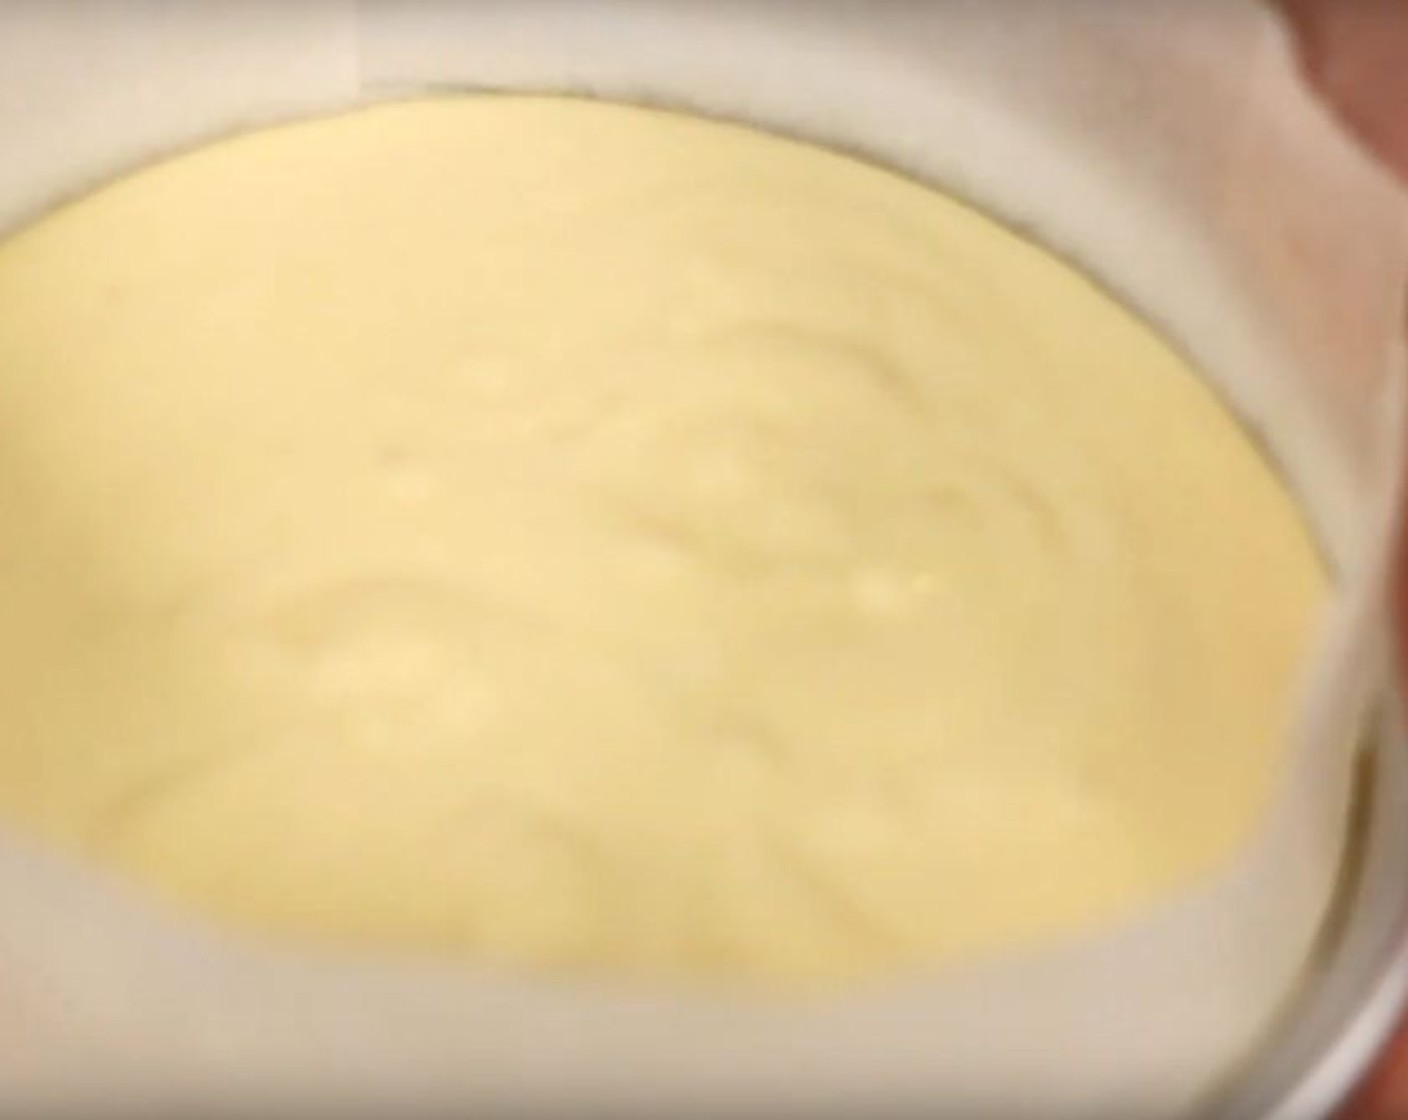 step 7 Transfer into a 6-inch cake pan with a removable bottom that has been greased and lined with parchment paper.